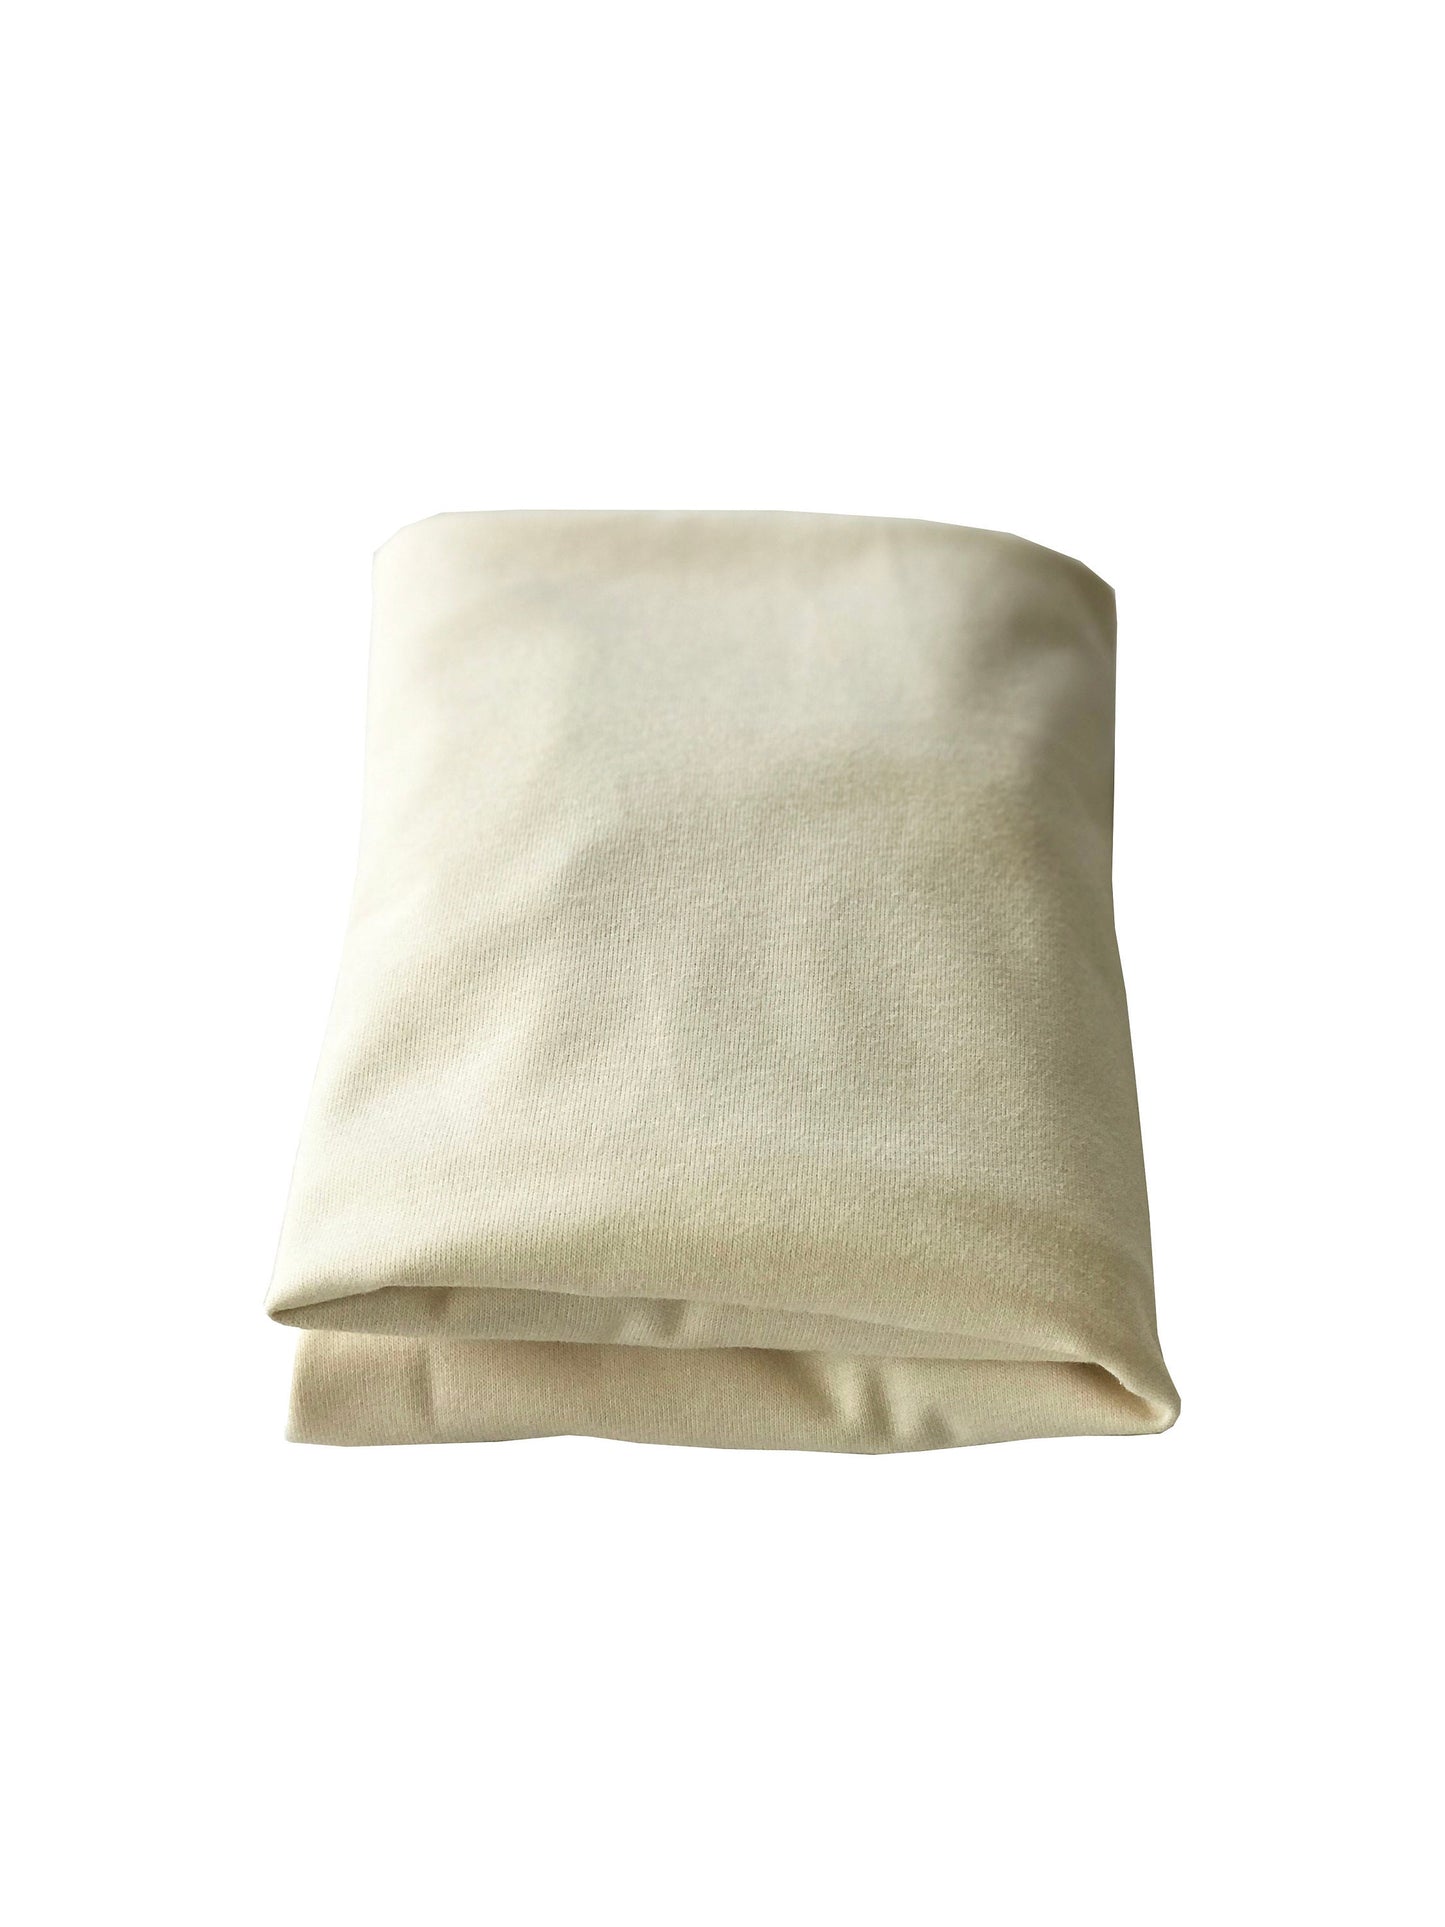 Waterproof Natural Ivory Organic Cotton Jersey - Custom Fitted Sheet